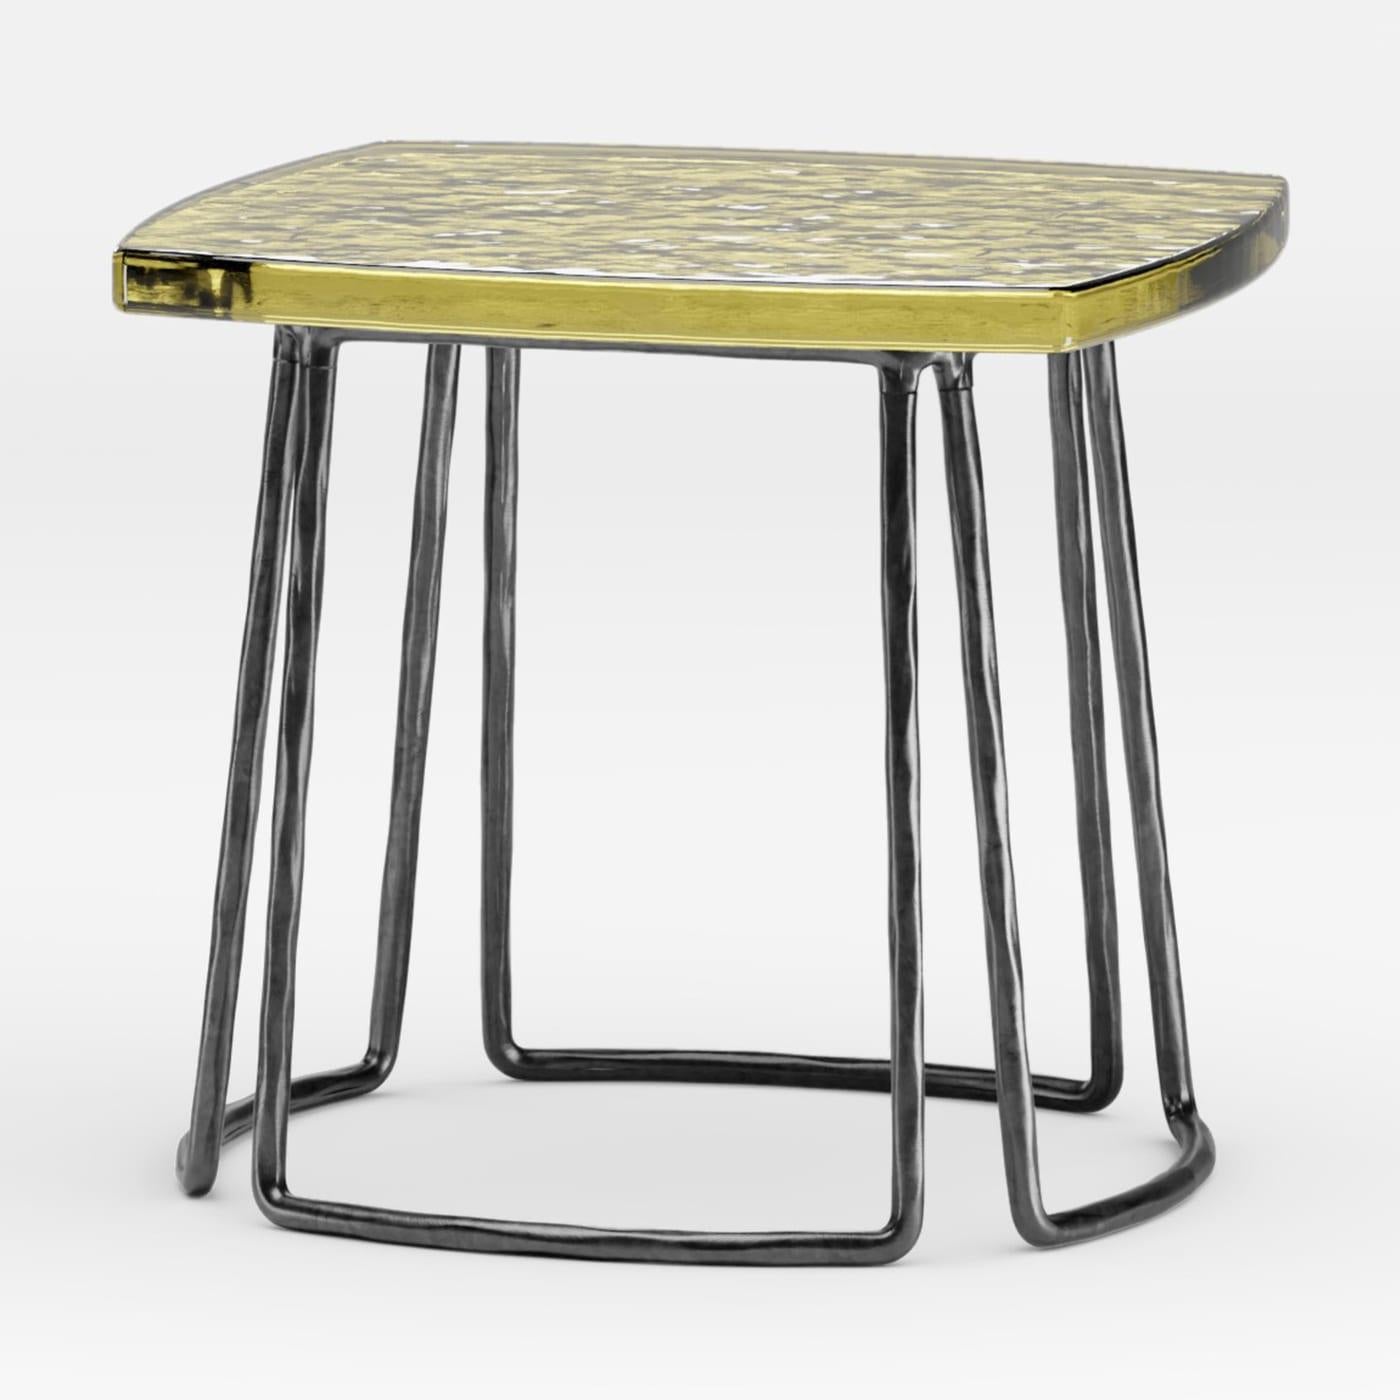 Italian Type Tall Green Side Table by Stormo Studio For Sale